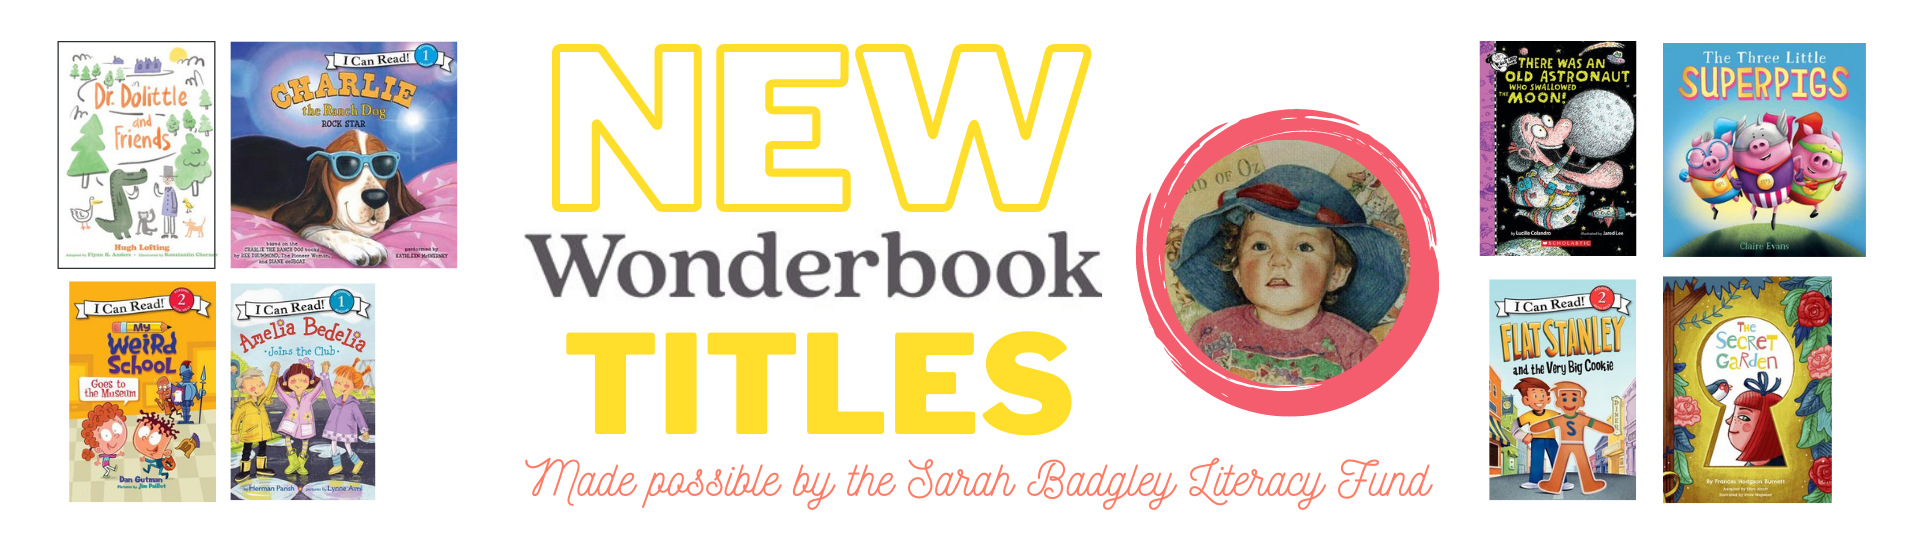 New WonderBook Titles made possible by the Sarah Badgley Fund with some covers of books